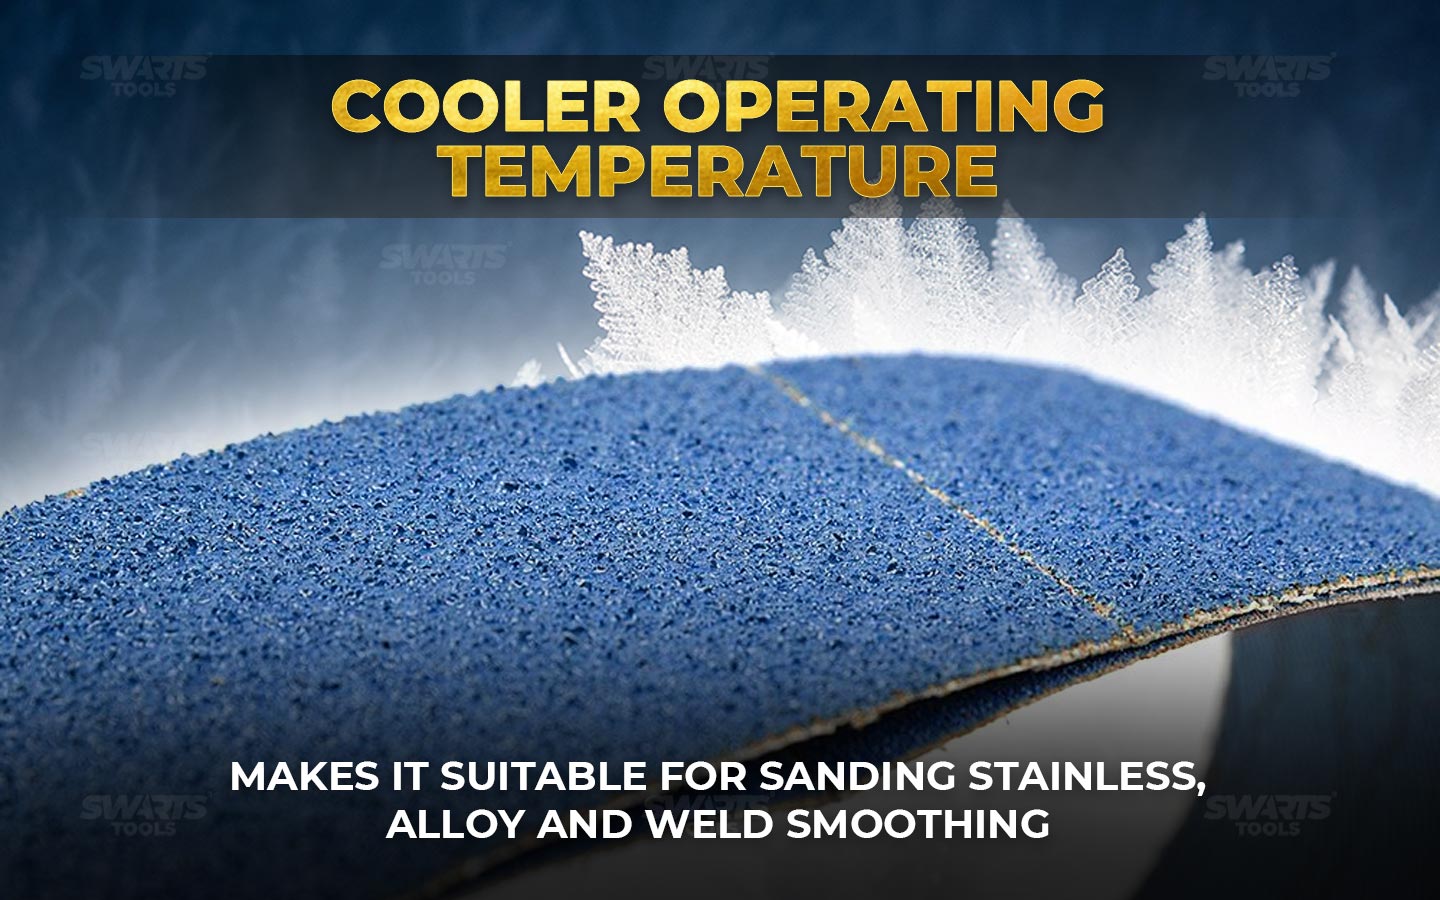 Cooler operating temperature makes it suitable for sanding stainless, alloy and weld smoothing